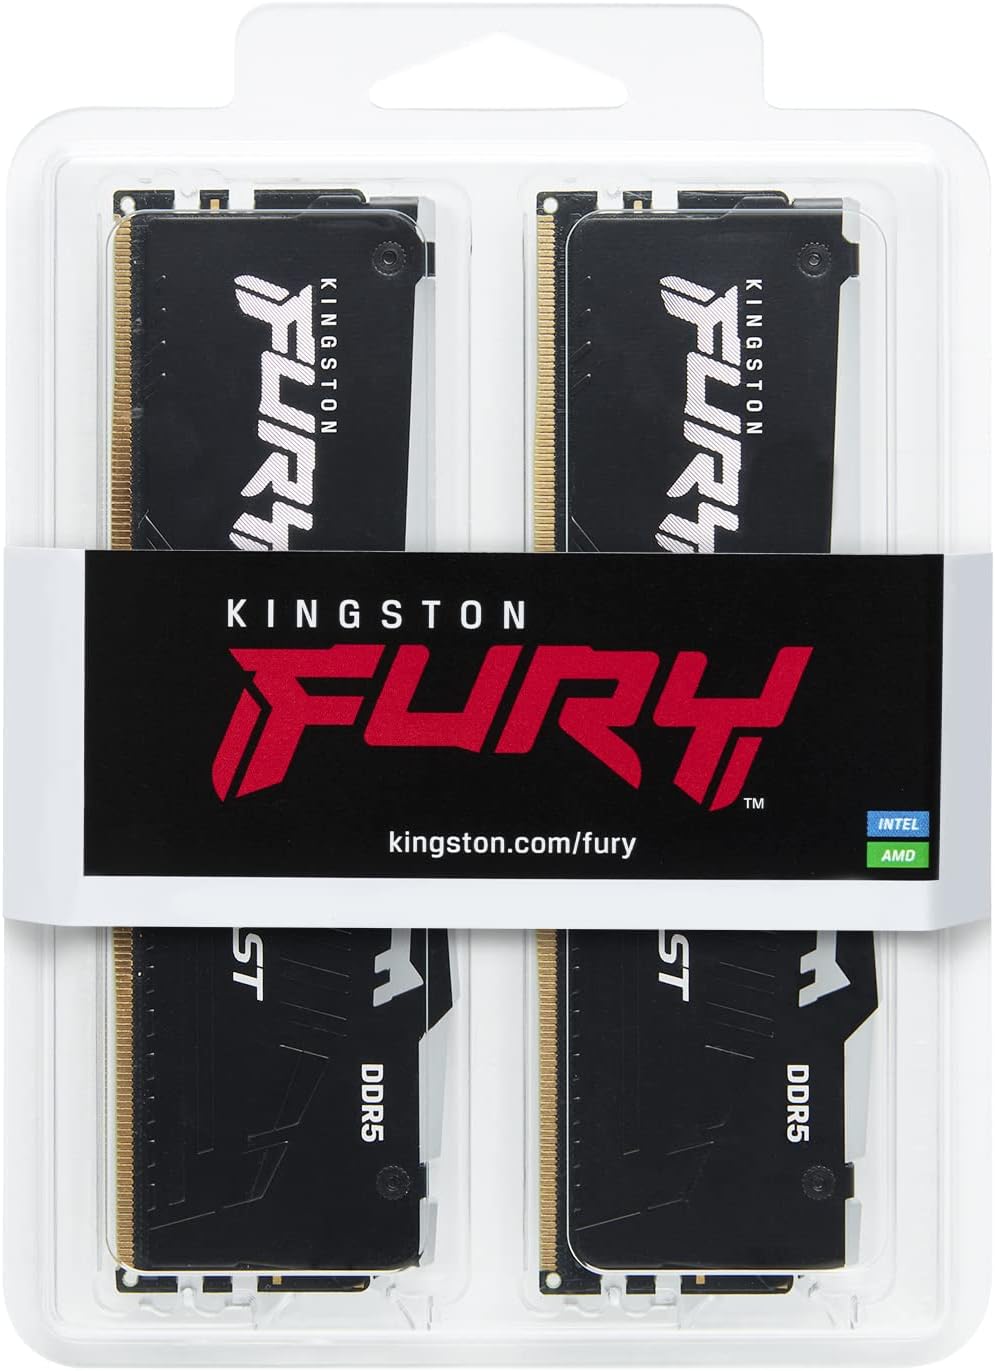 Kingston Fury Beast DDR5 RGB 32GB Desktop Memory Kit - Improved stability for overclocking enthusiasts. 0740617328493